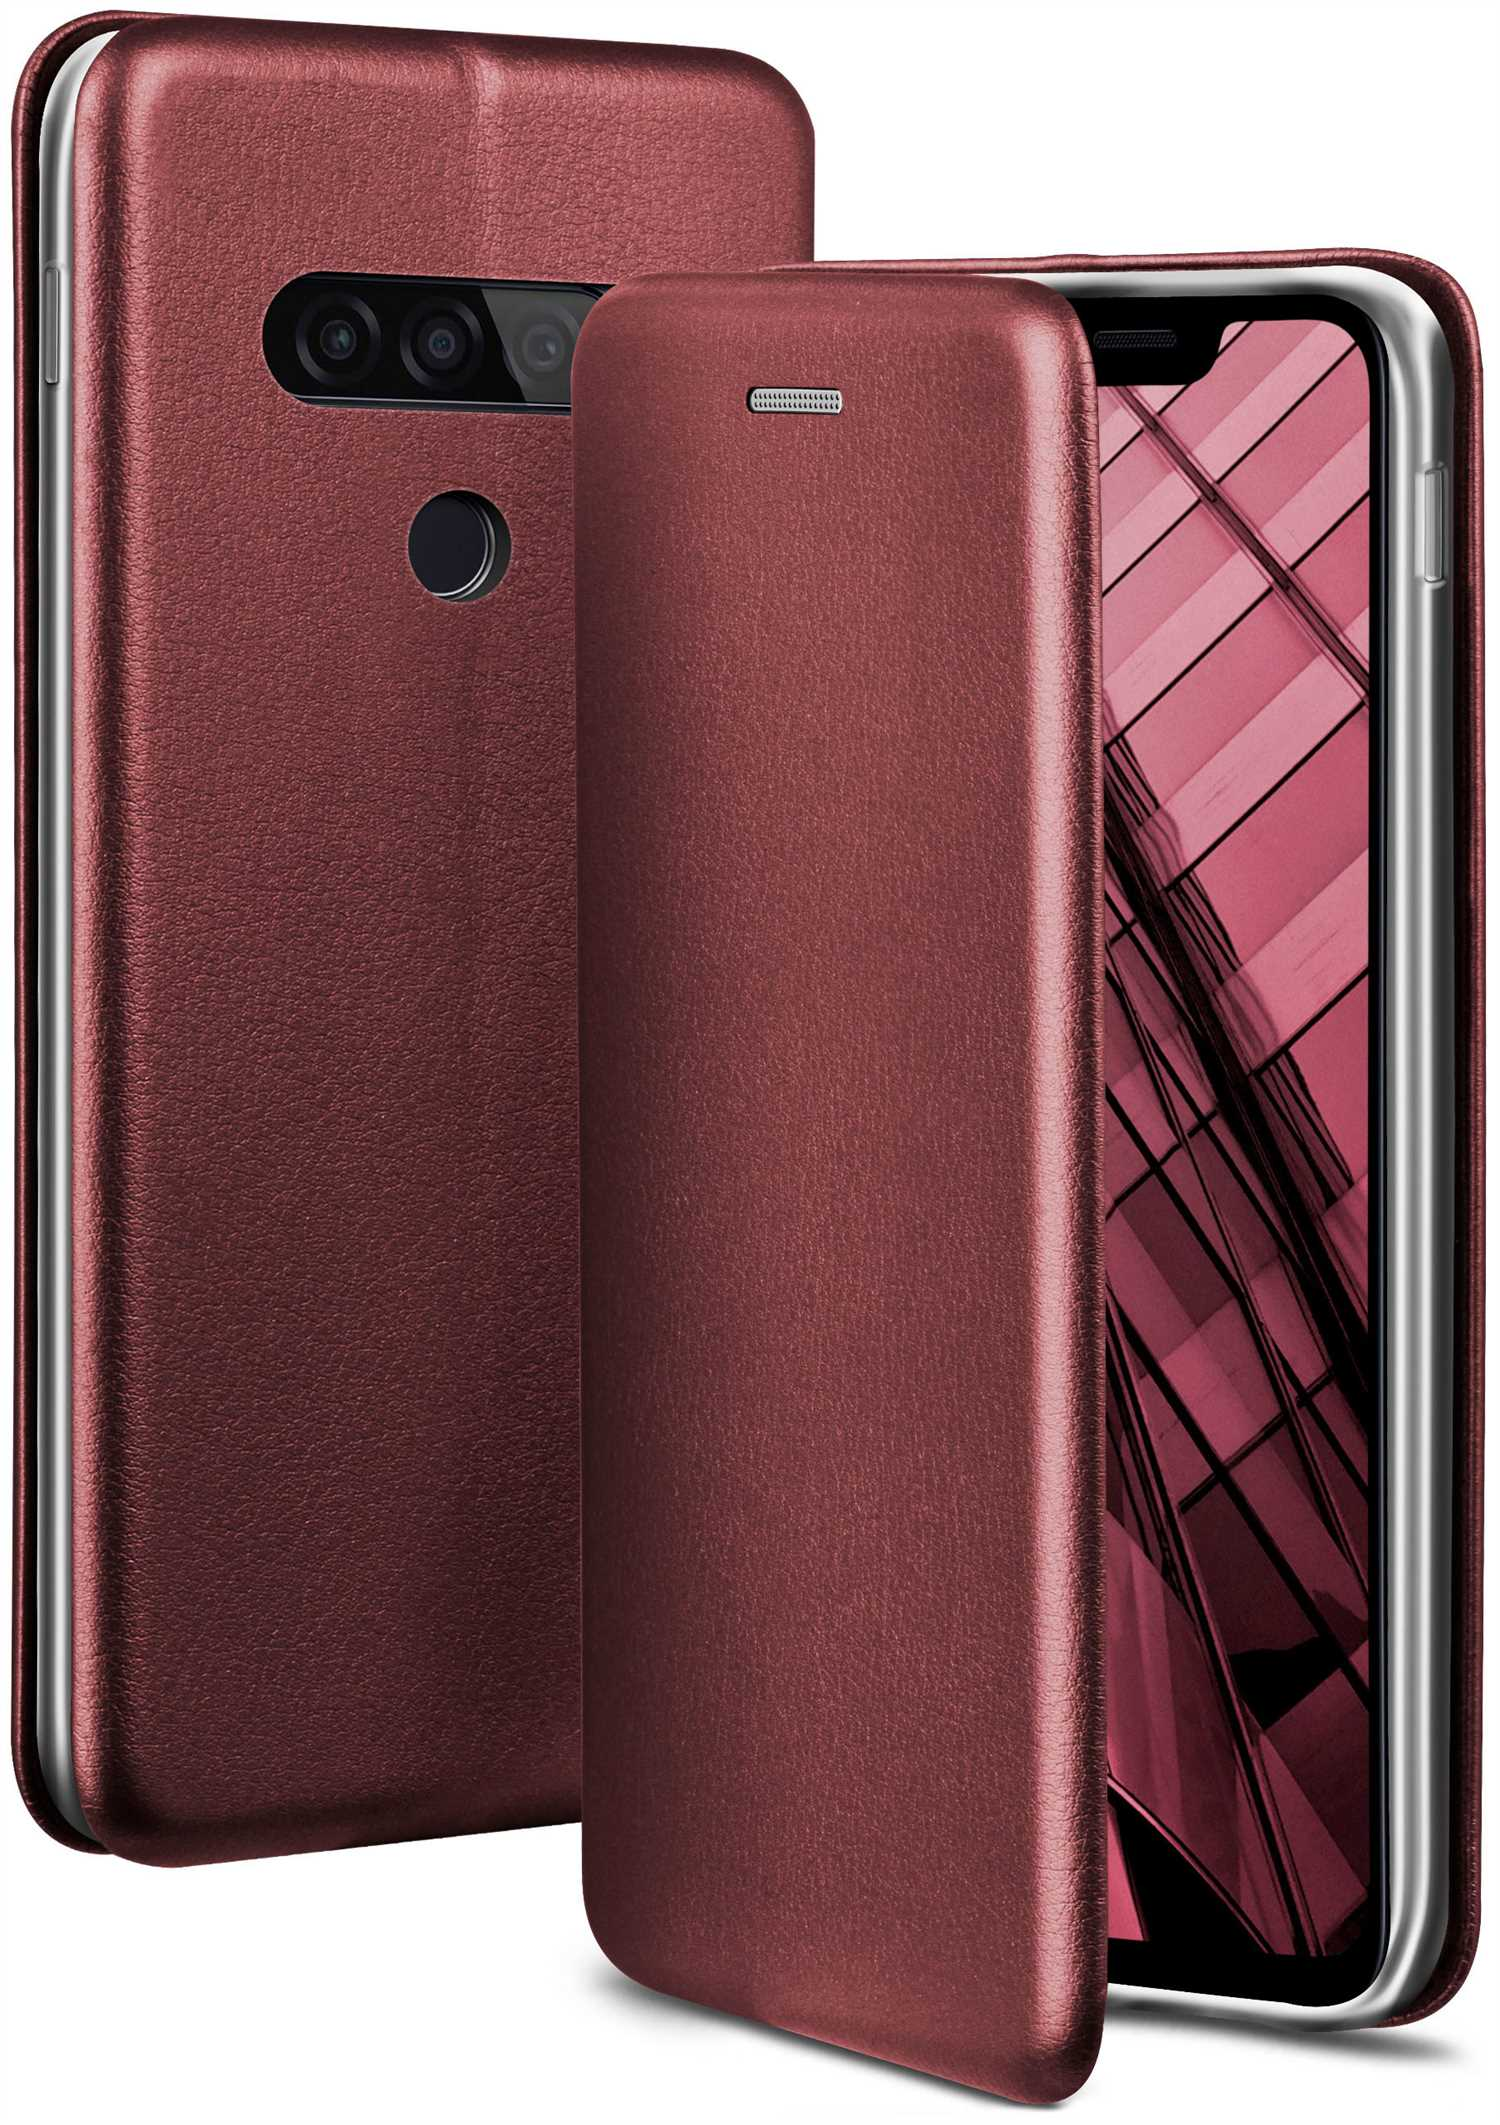 Burgund Business Red G8s Flip ThinQ, Case, LG, - ONEFLOW Cover,